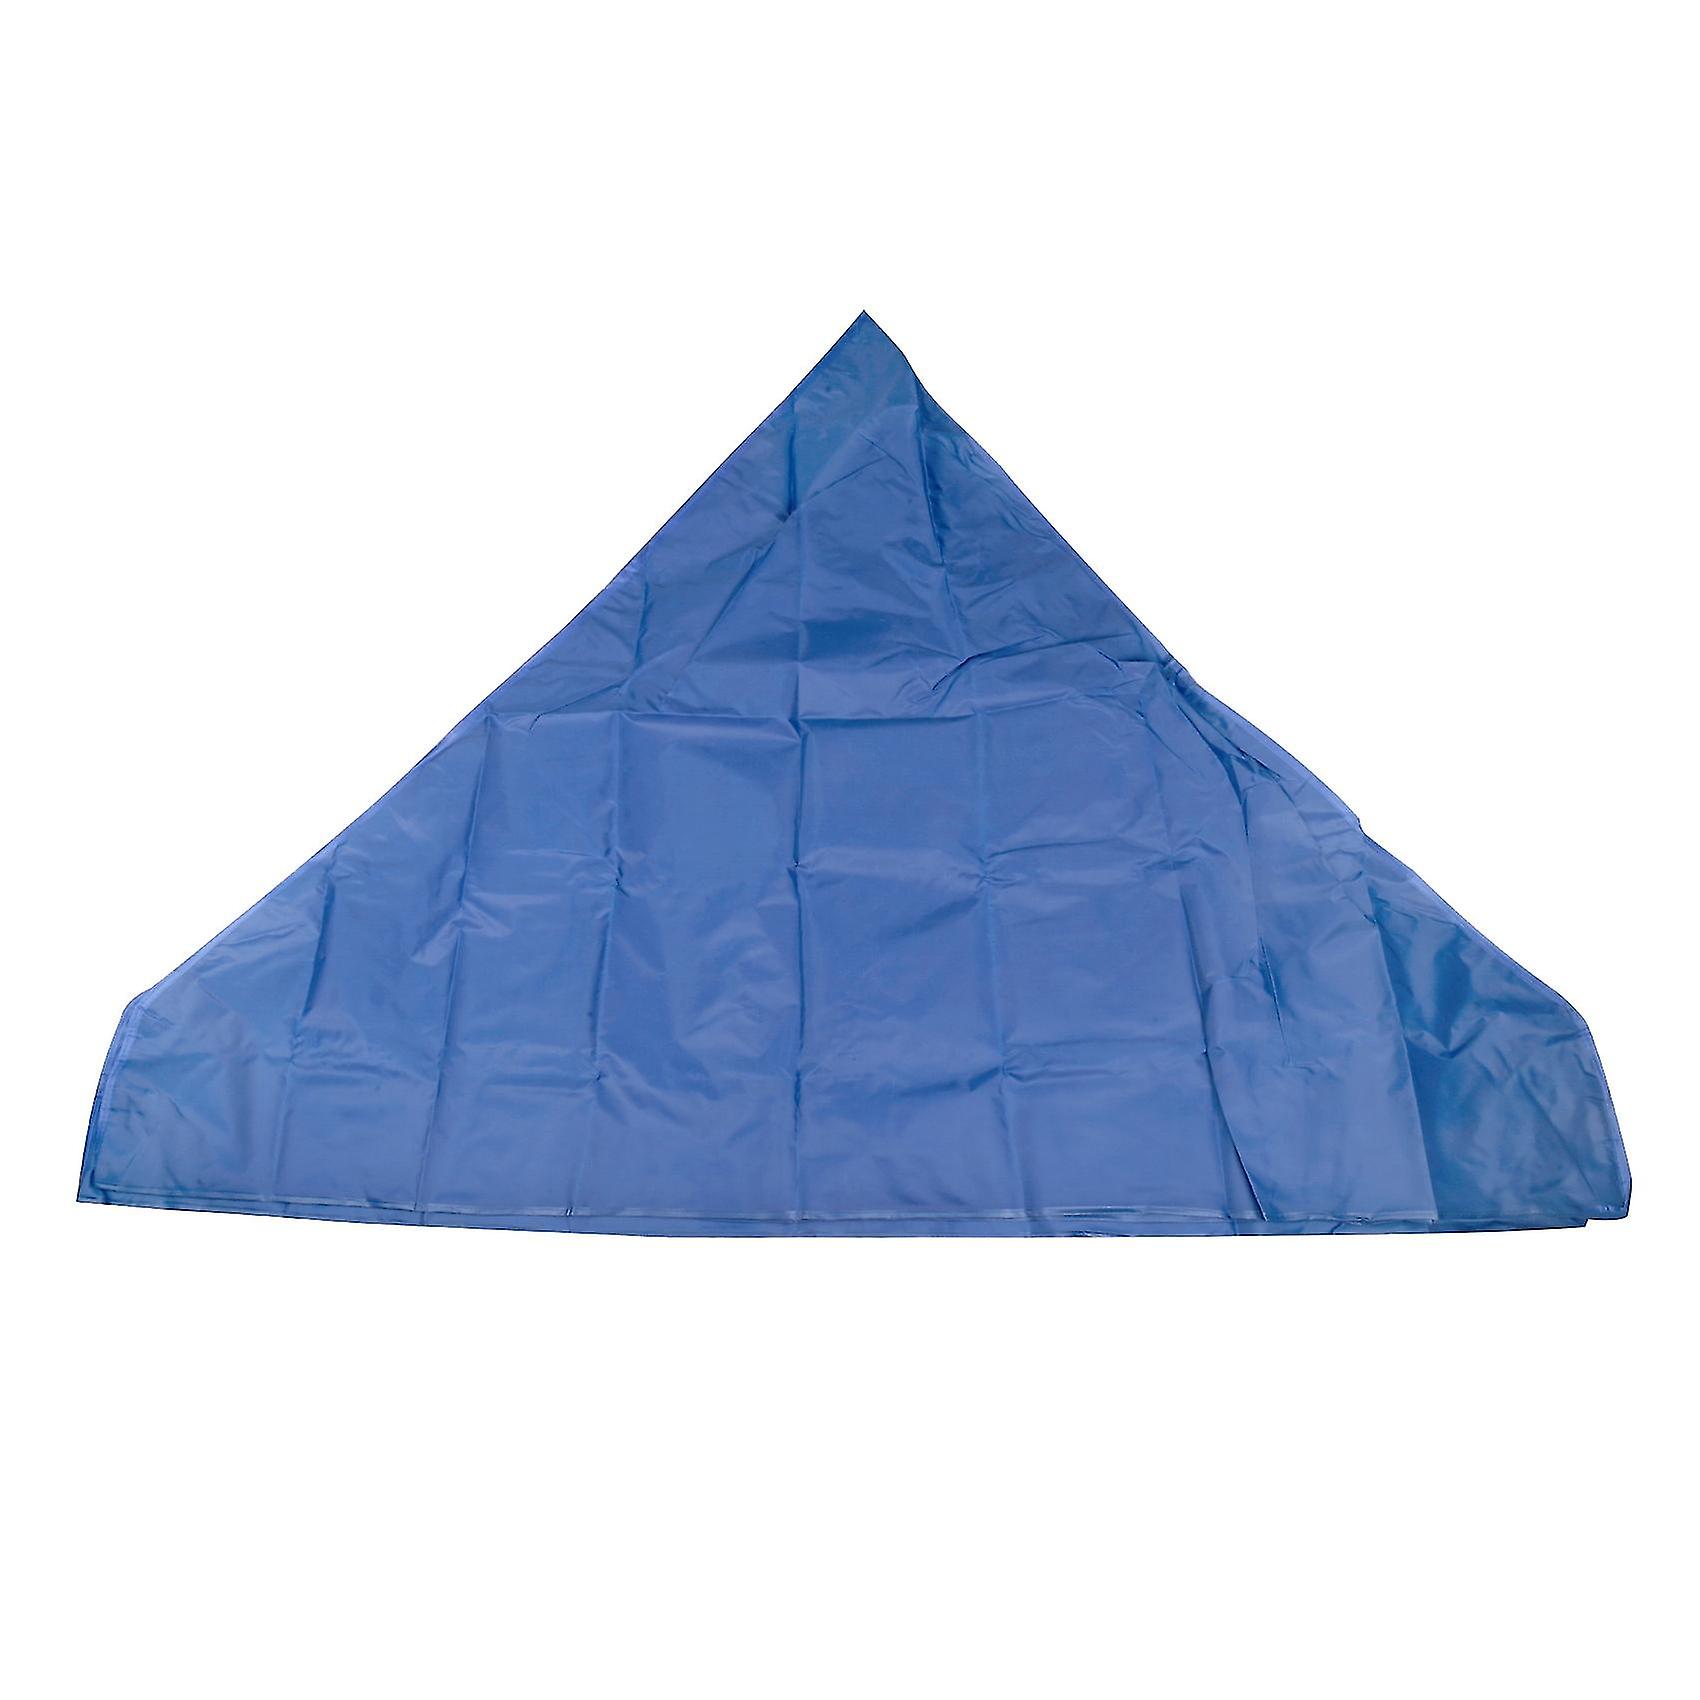 2x2m Canopy Top Cover Replacement Four corner Tent Cloth Foldable Rainproof Patio Replacement Blue